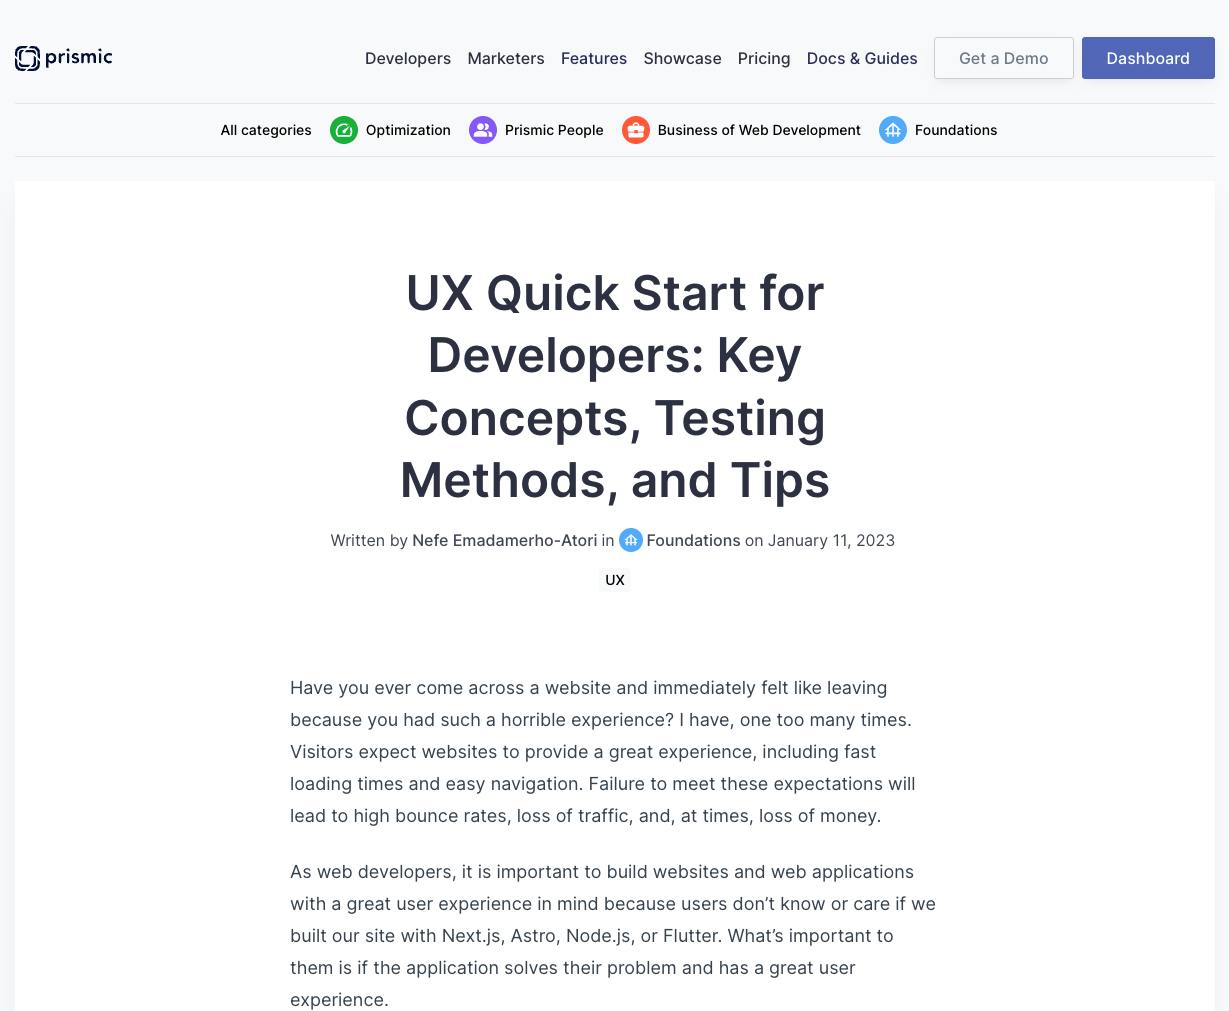 How We Built Our Brand New Developer Portal. And Why…